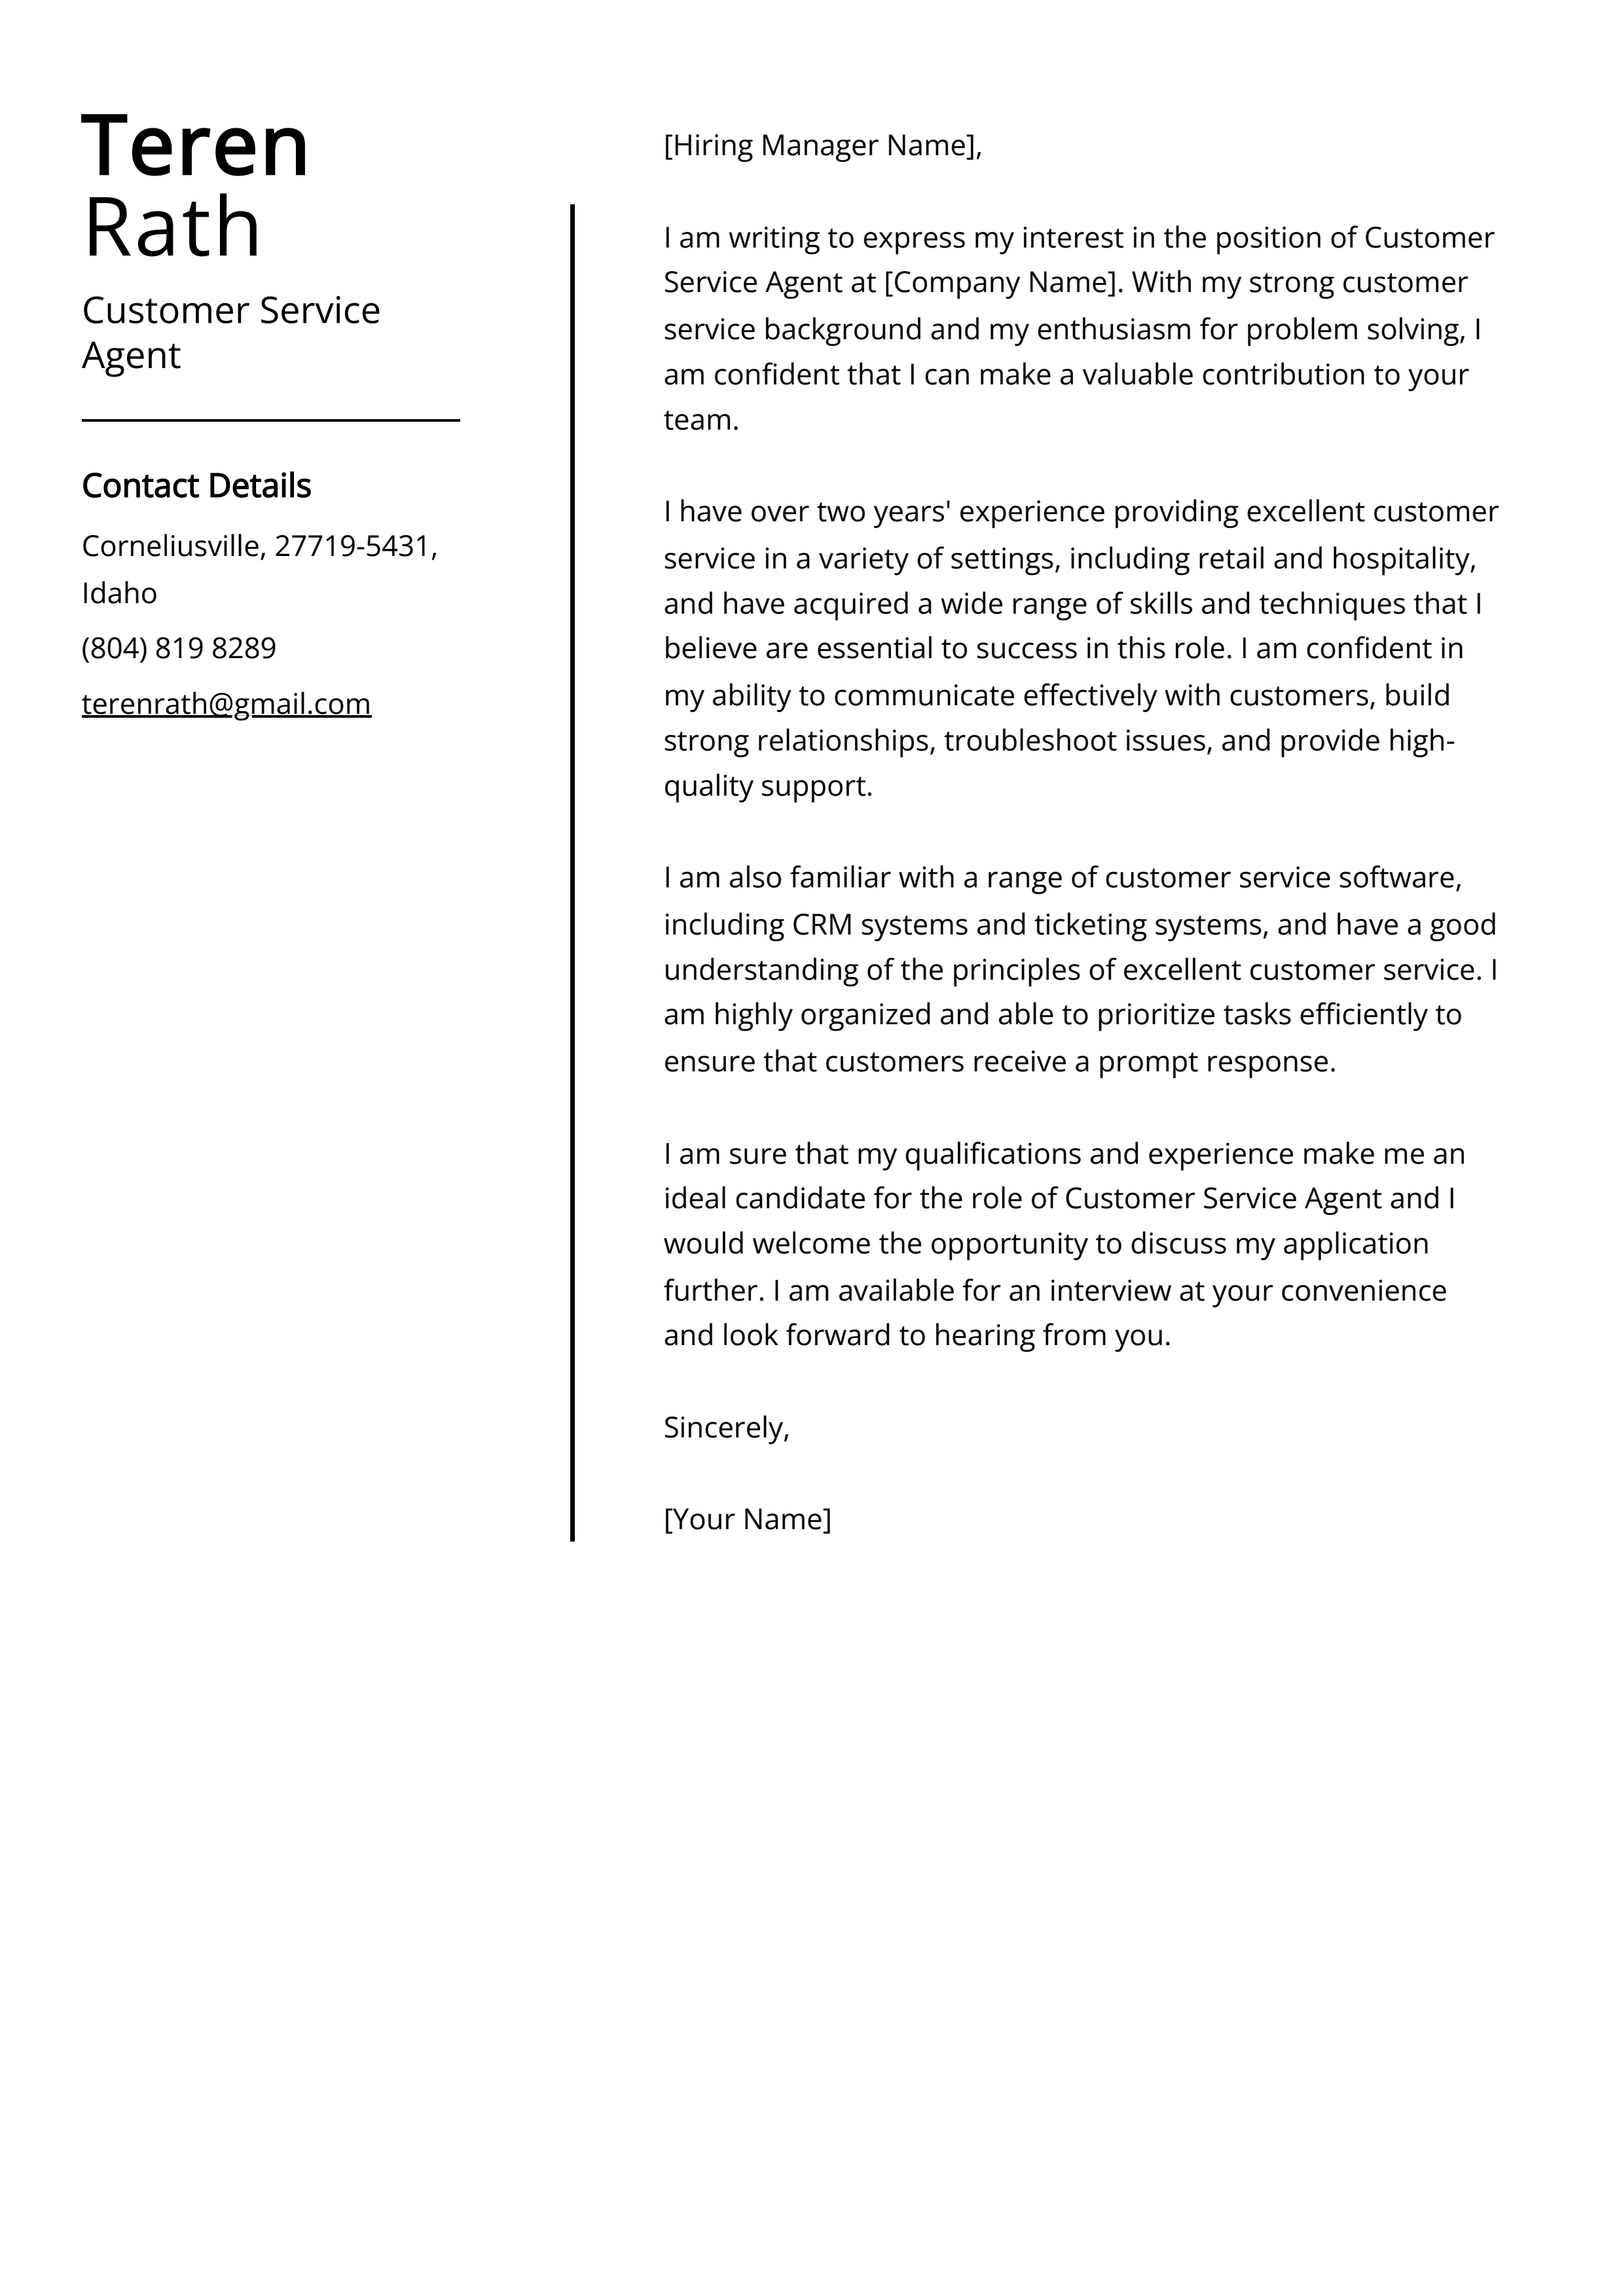 Customer Service Agent Cover Letter Example